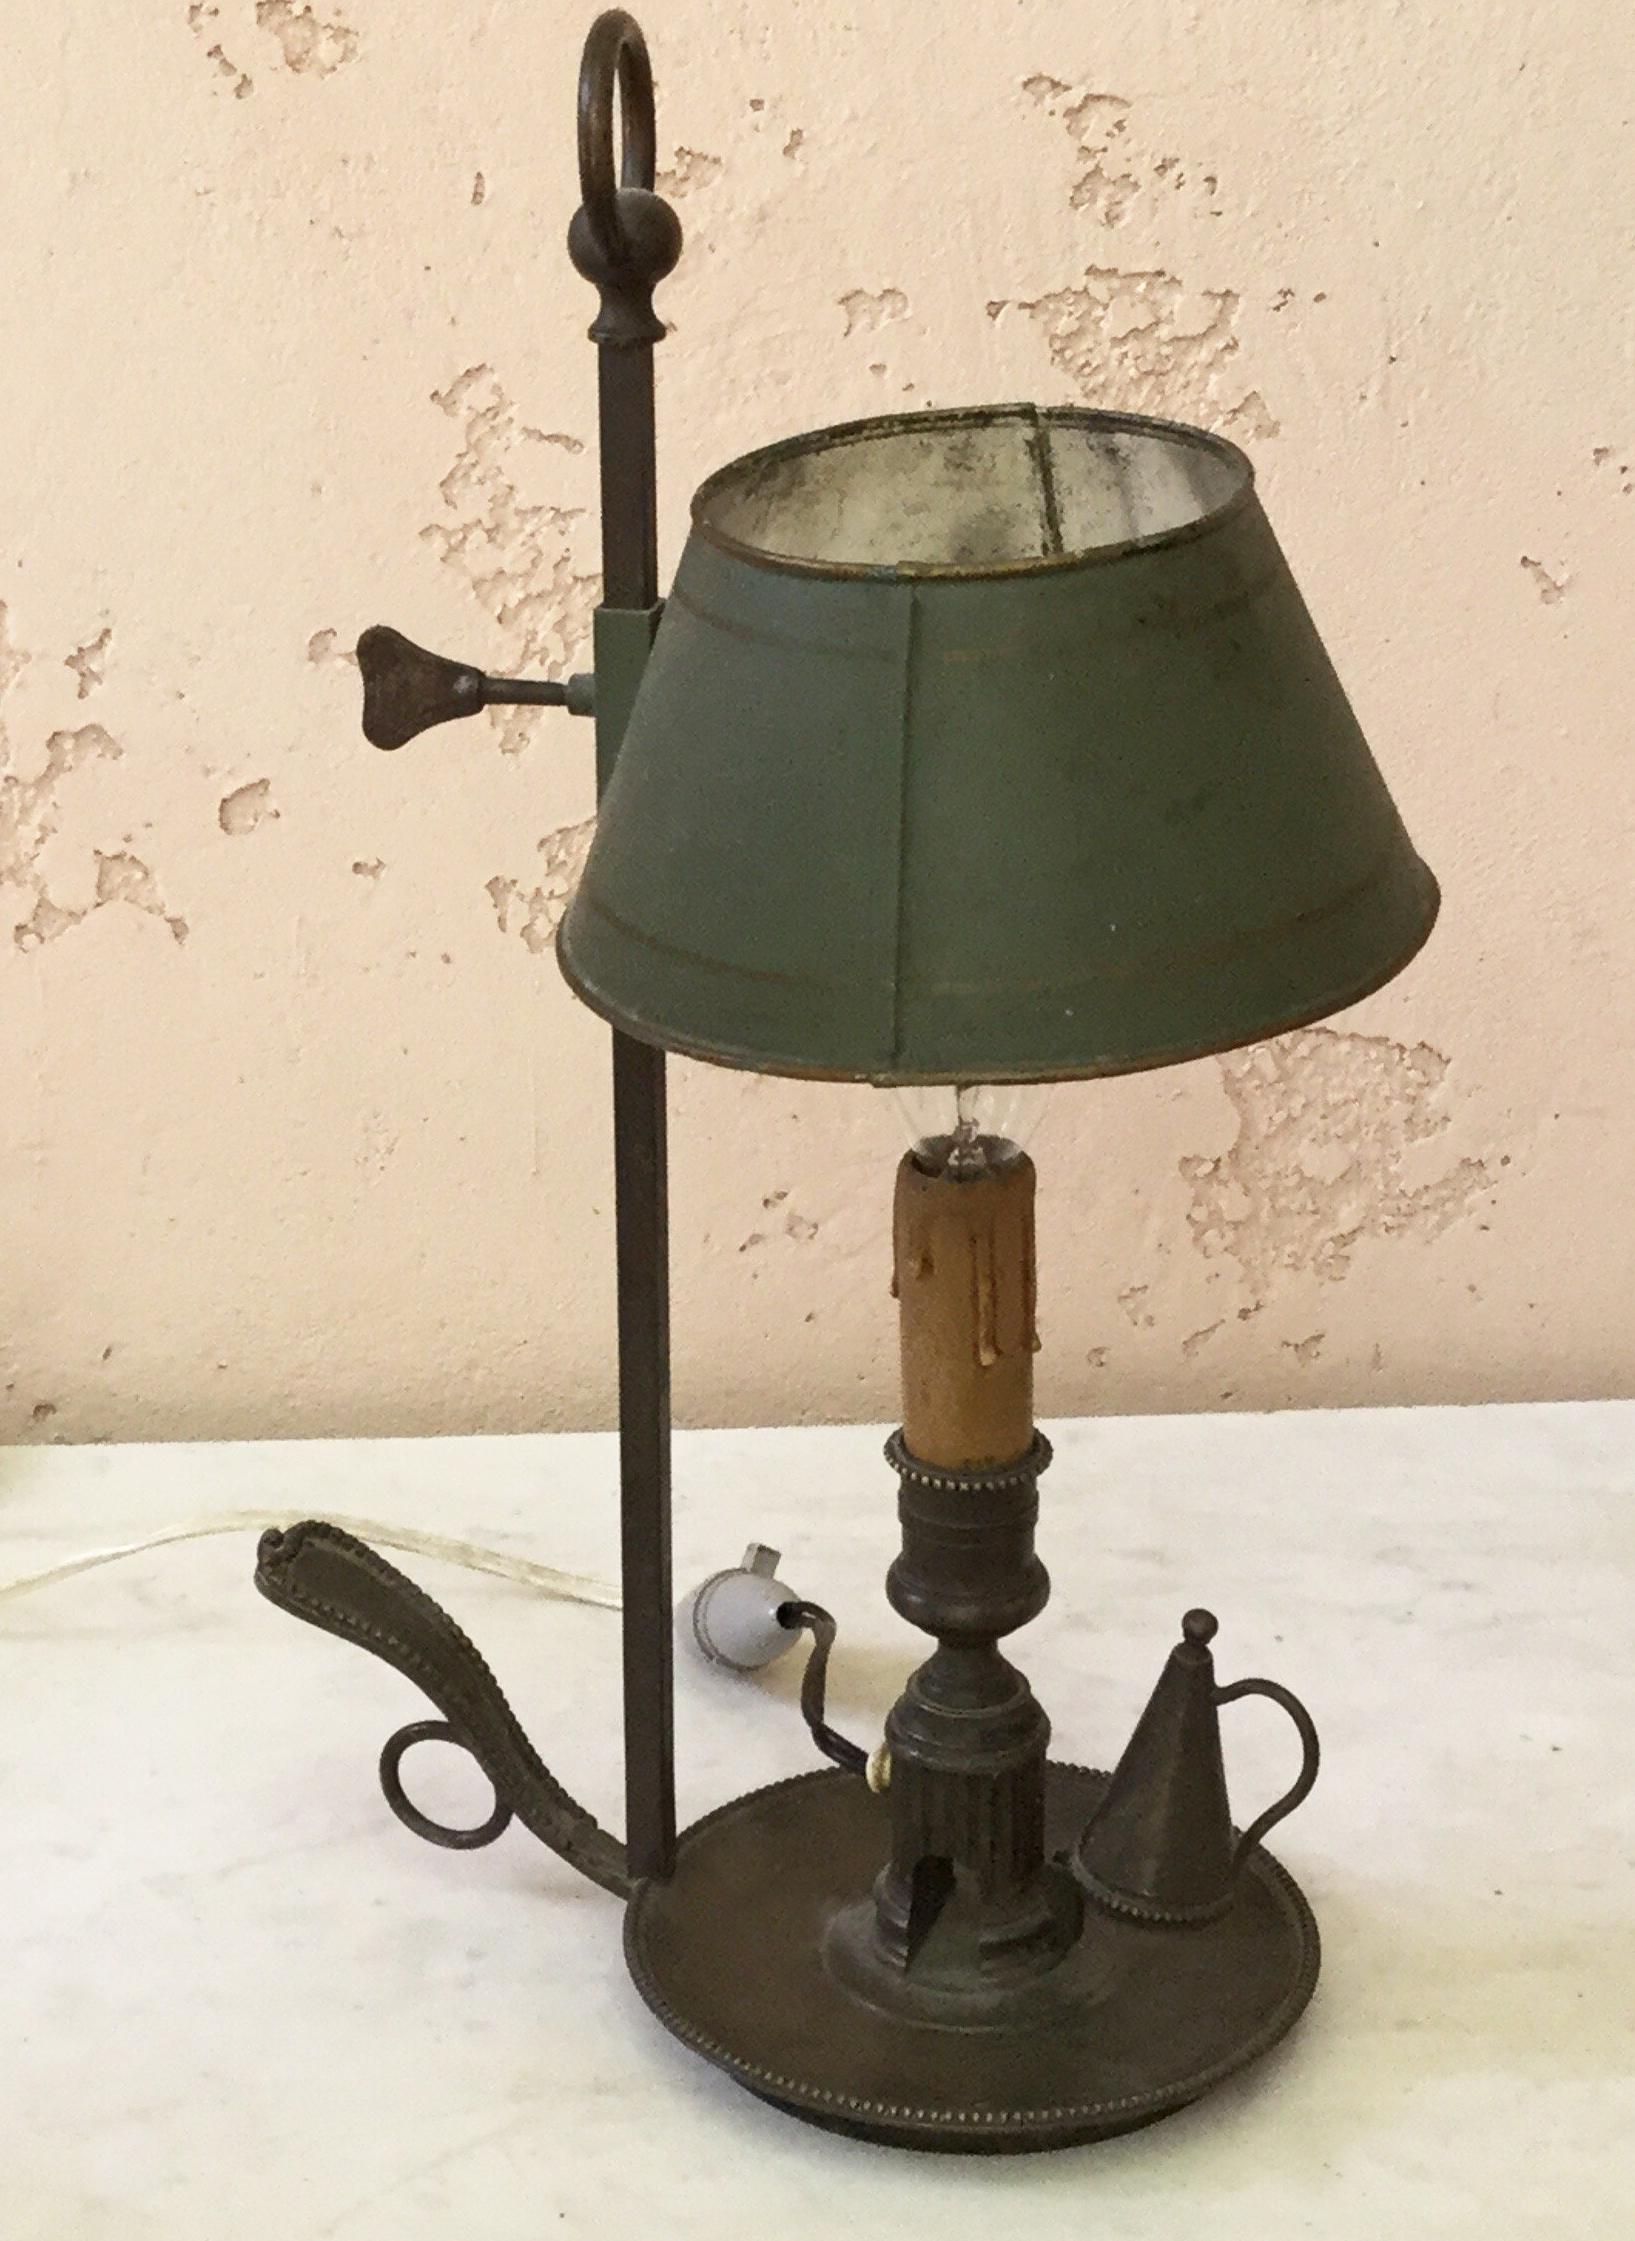 Elegant 19th century French brass bouillote lamp with a green tole shade.
The lamp have an handle and the piece to switch off the candle, originally used for a candle , electrified latety.
Wired for US.